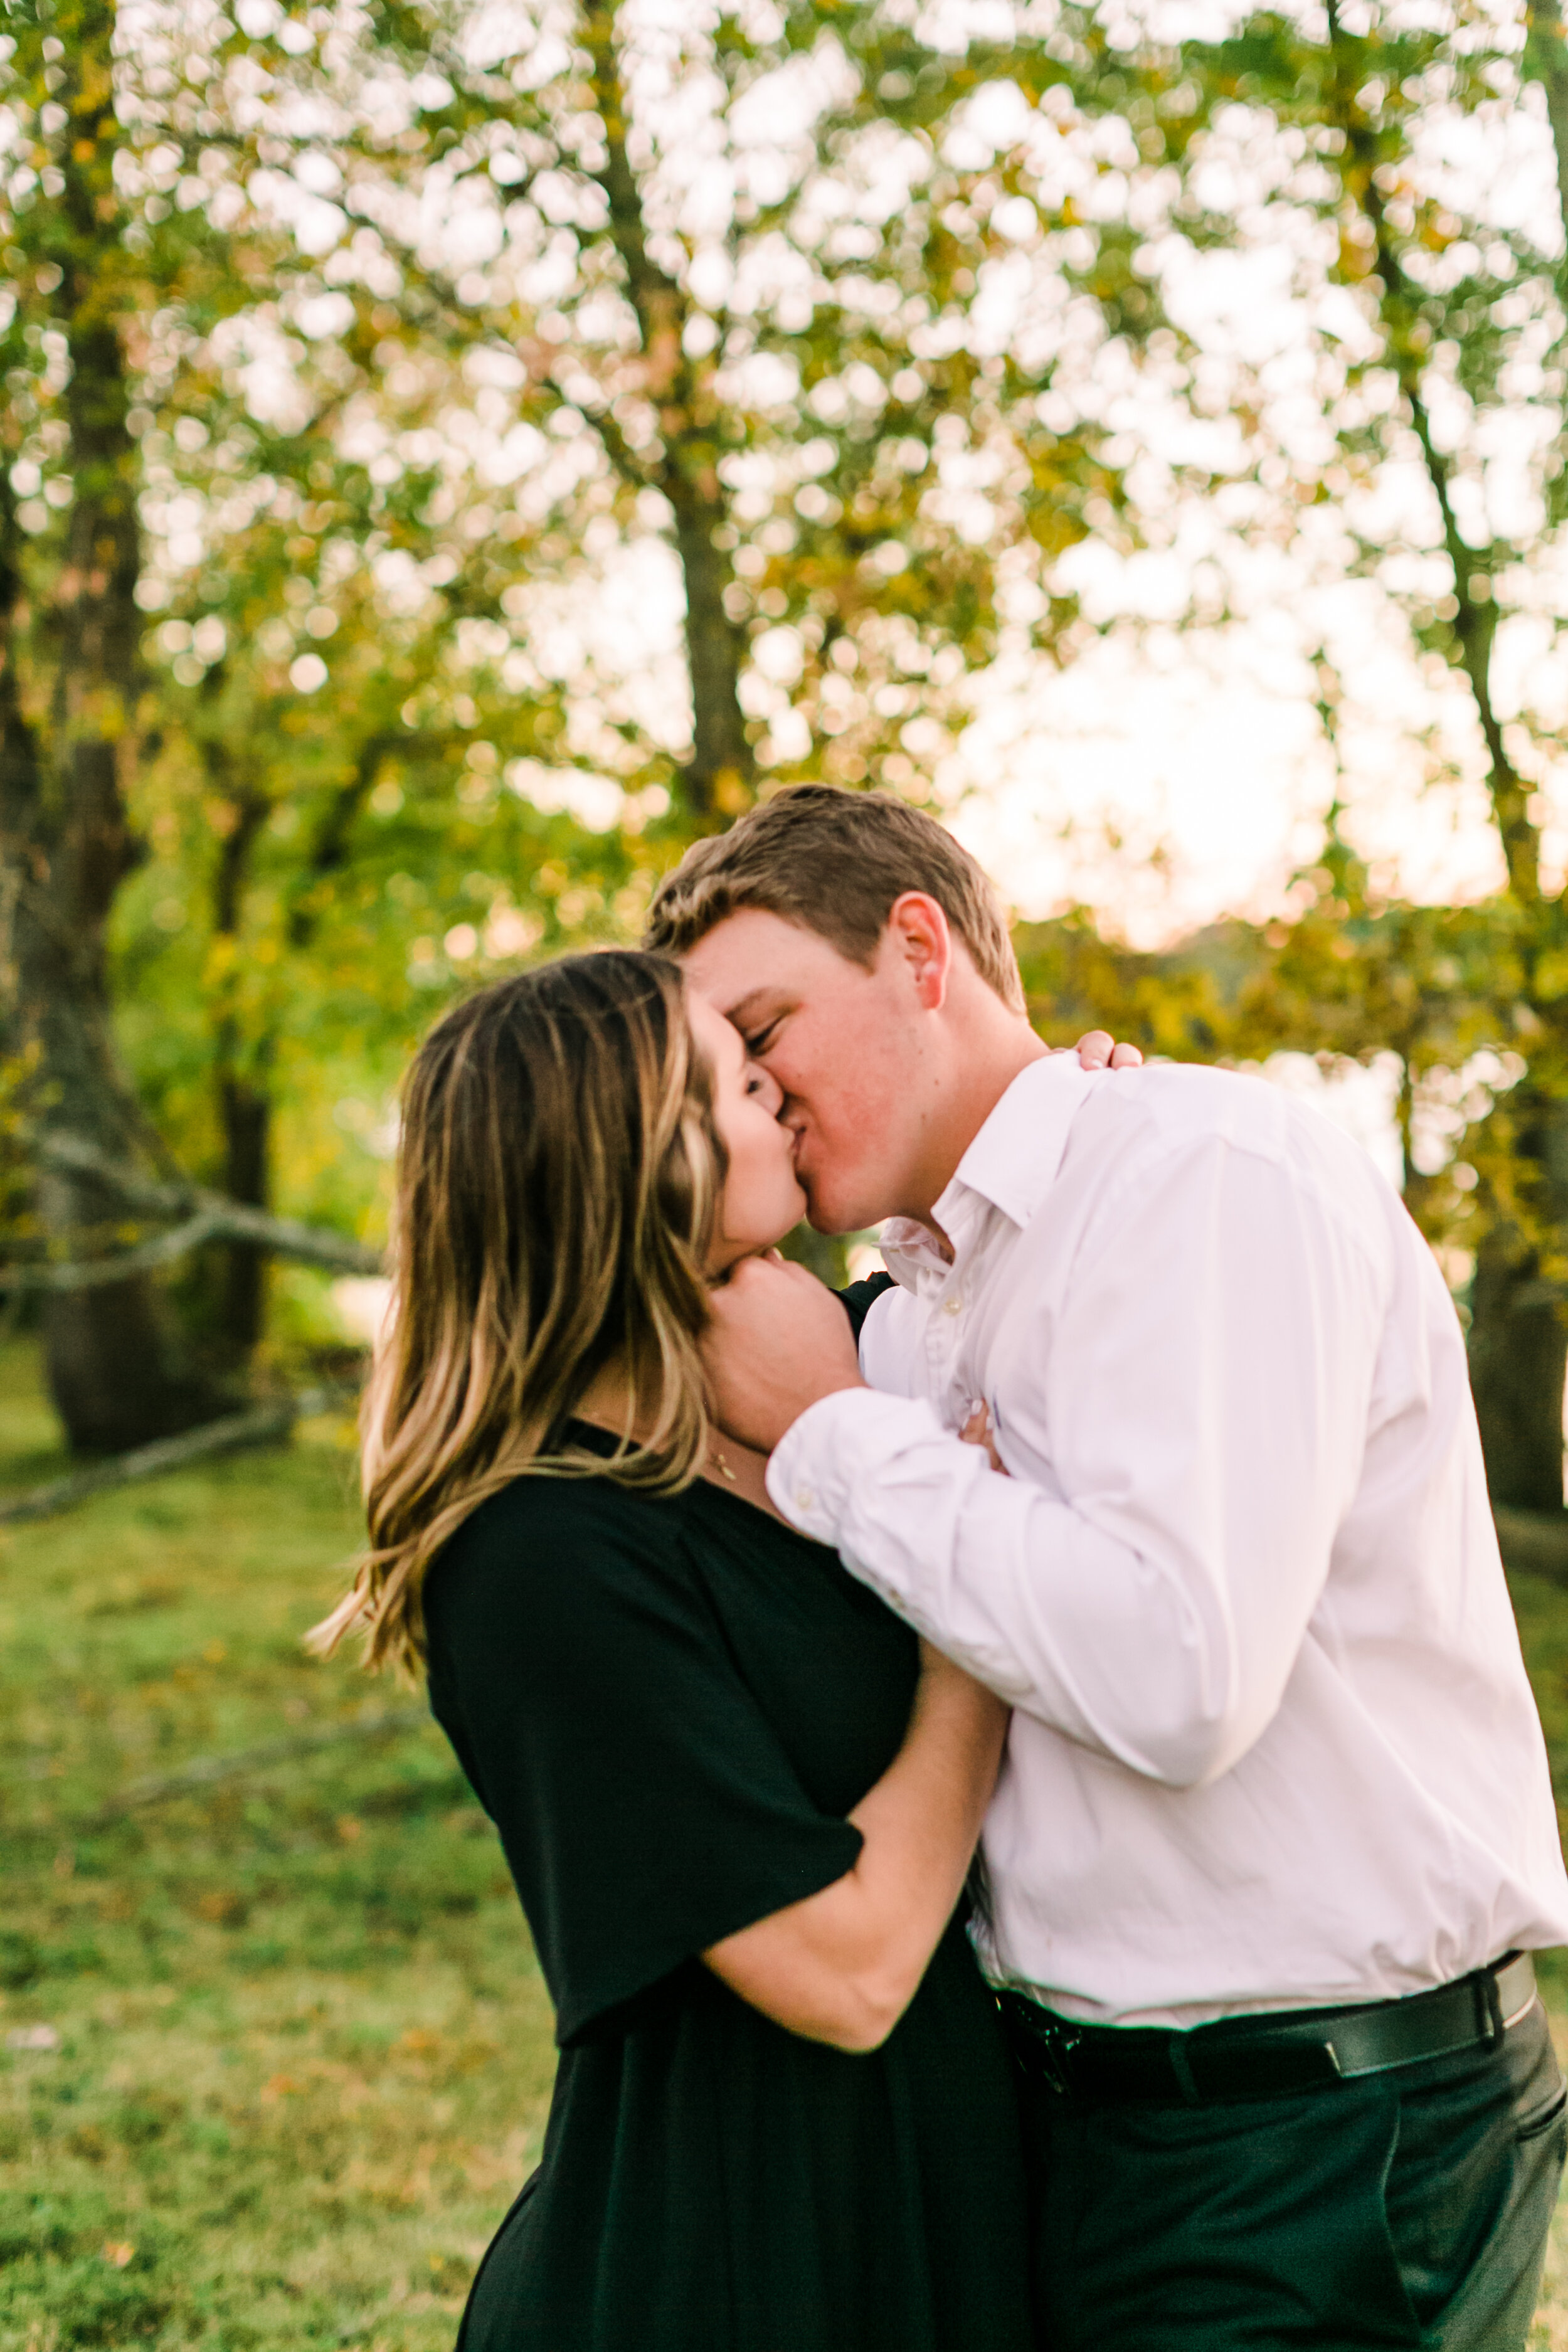 Tennessee+Fall+Engagement+Photos+Puppy (58 of 63).jpg